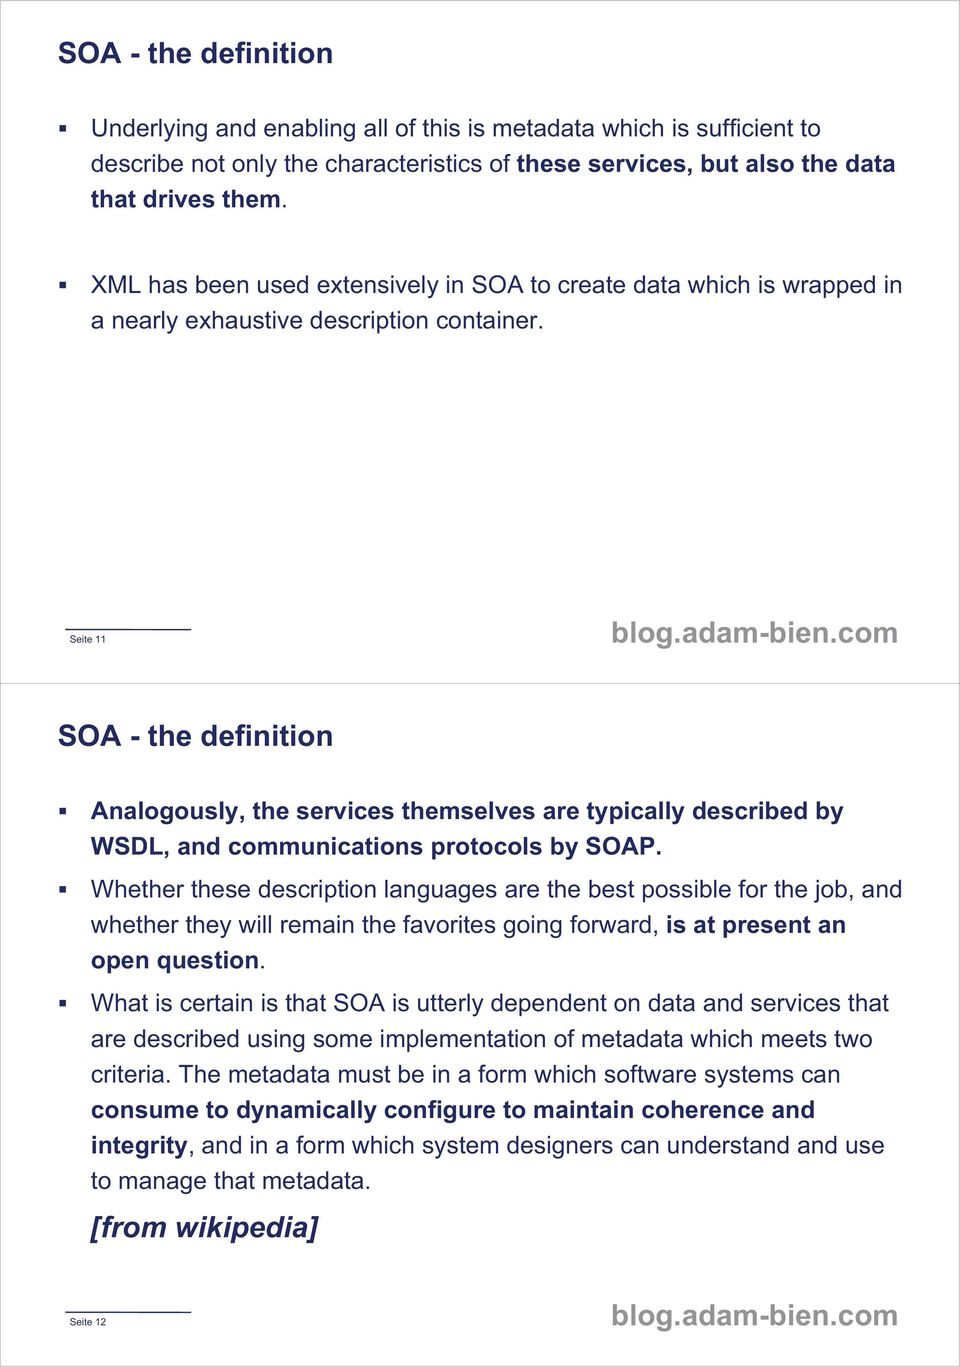 Seite 11 SOA - the definition Analogously, the services themselves are typically described by WSDL, and communications protocols by SOAP.